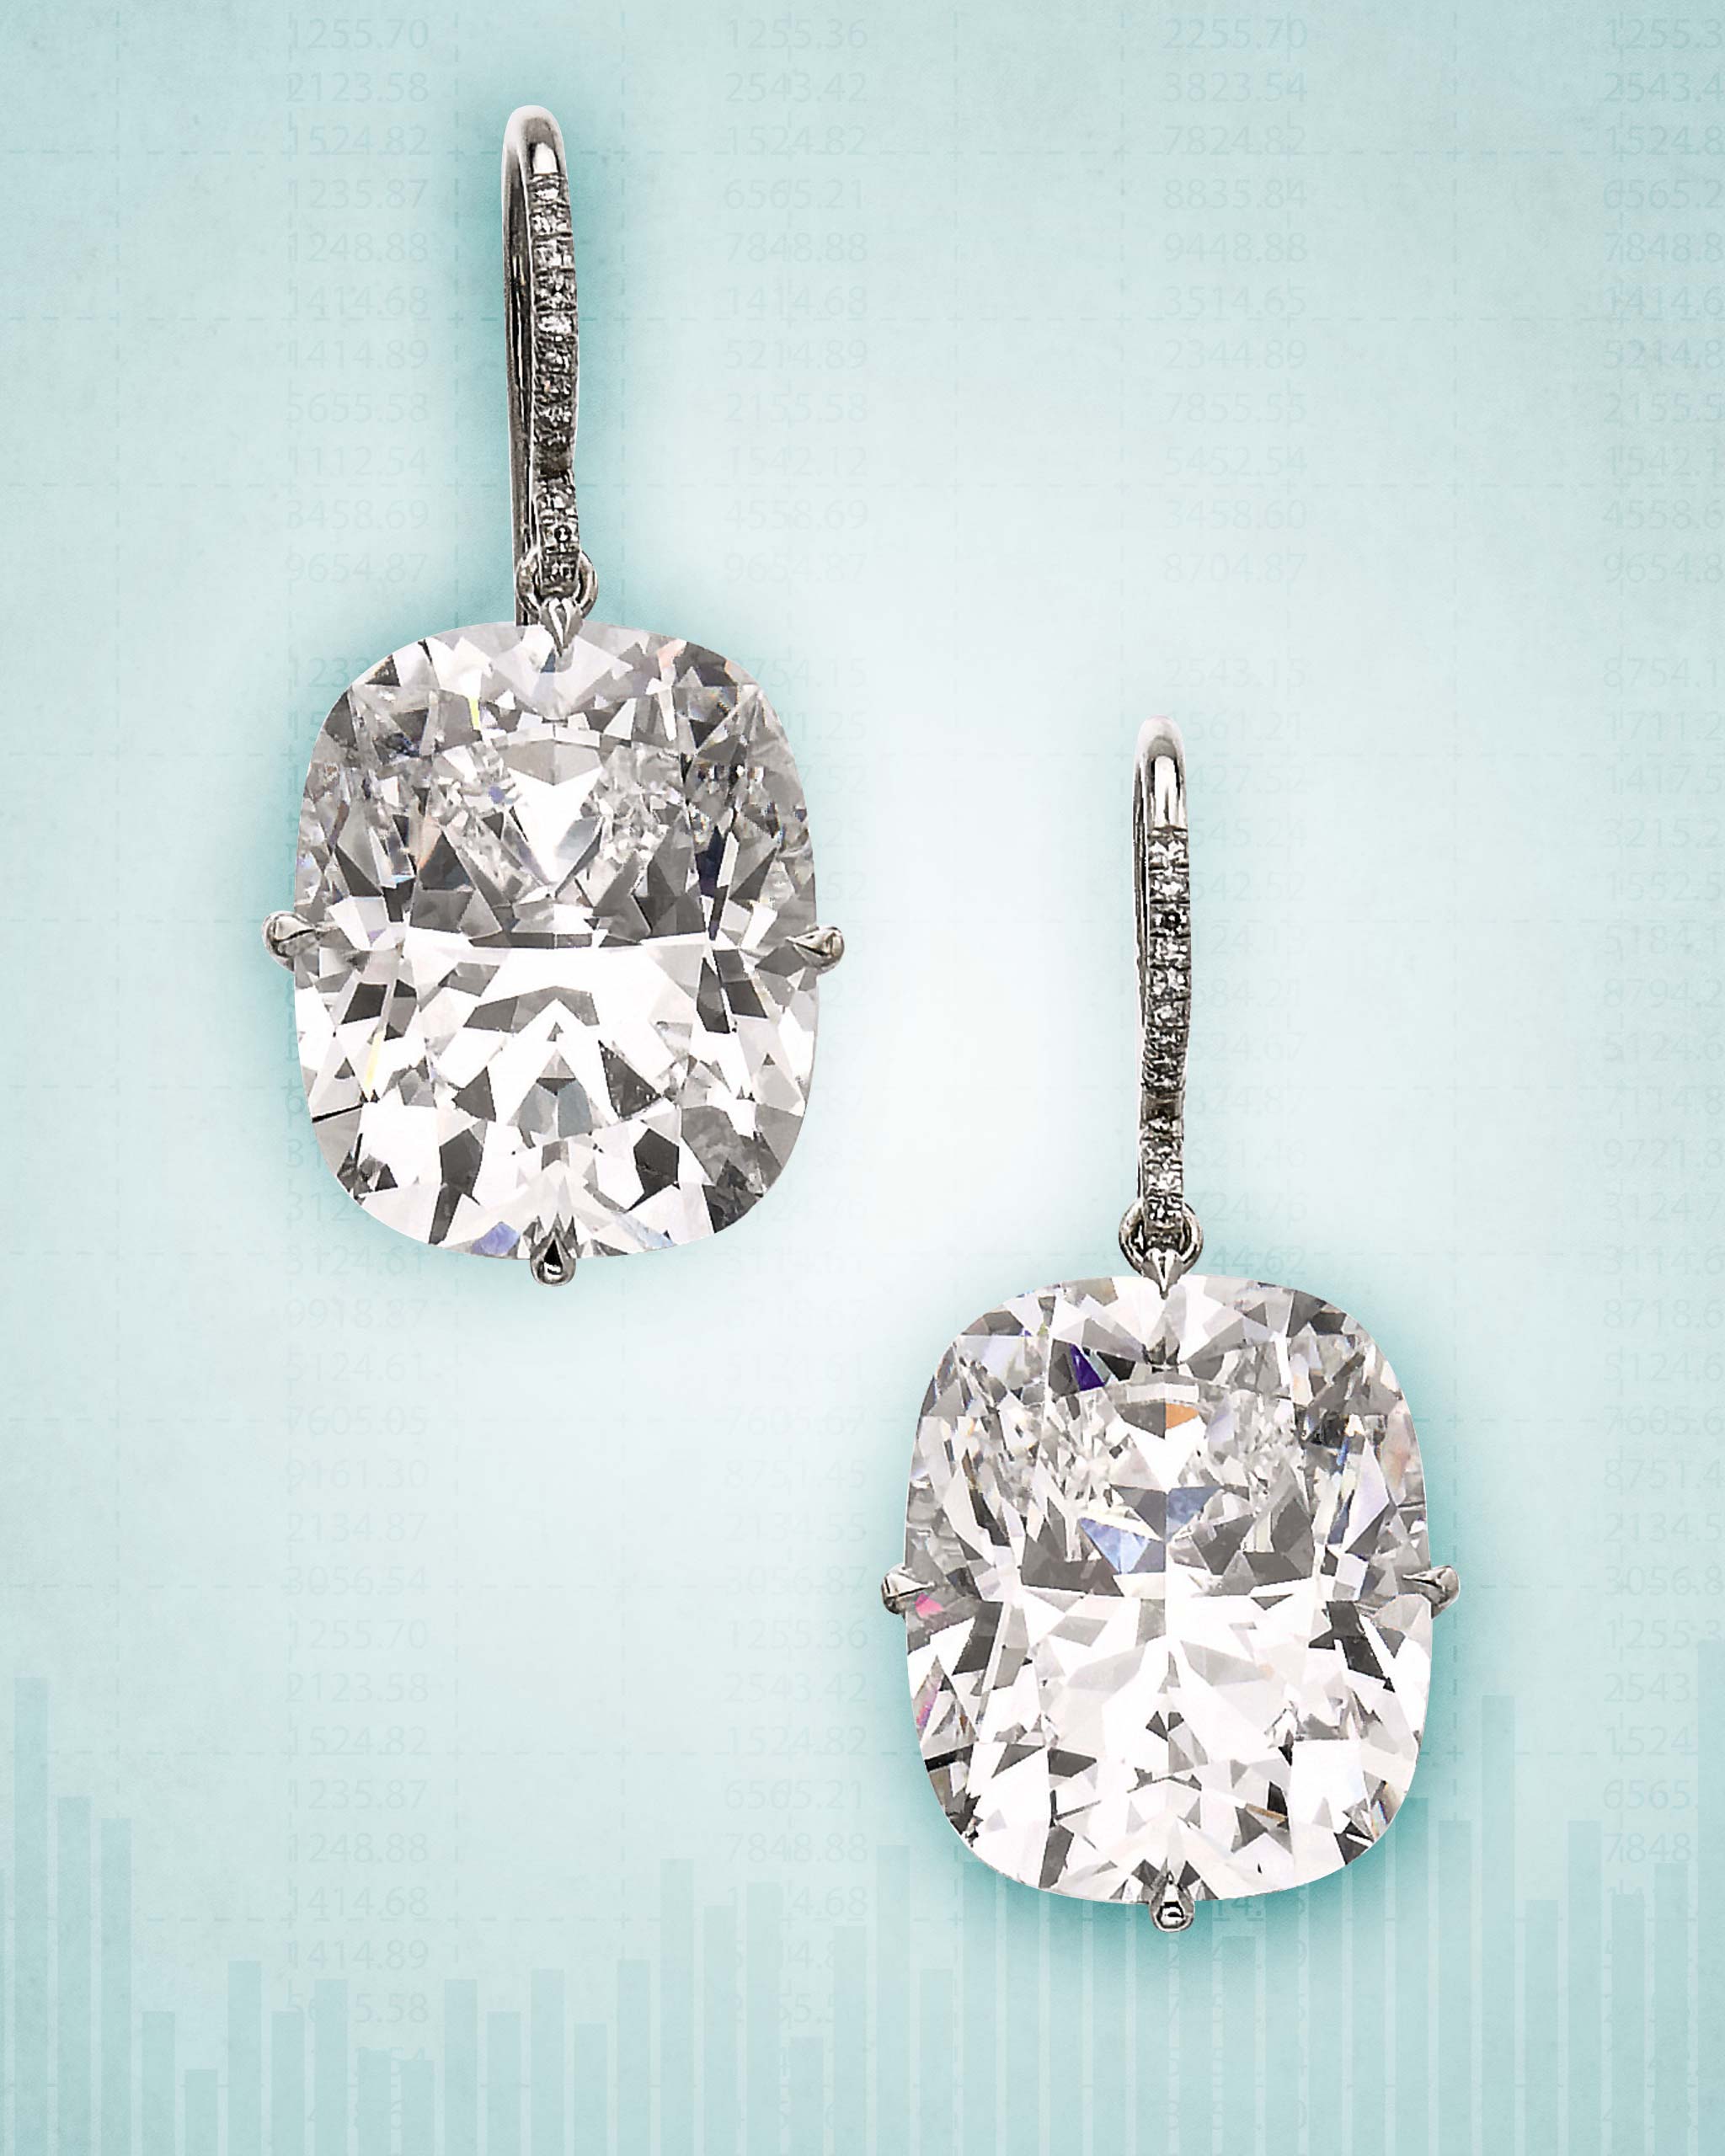 13.5-carat D-color cushion cut diamond earrings sold at the 2020 Sotheby’s jewelry auction 